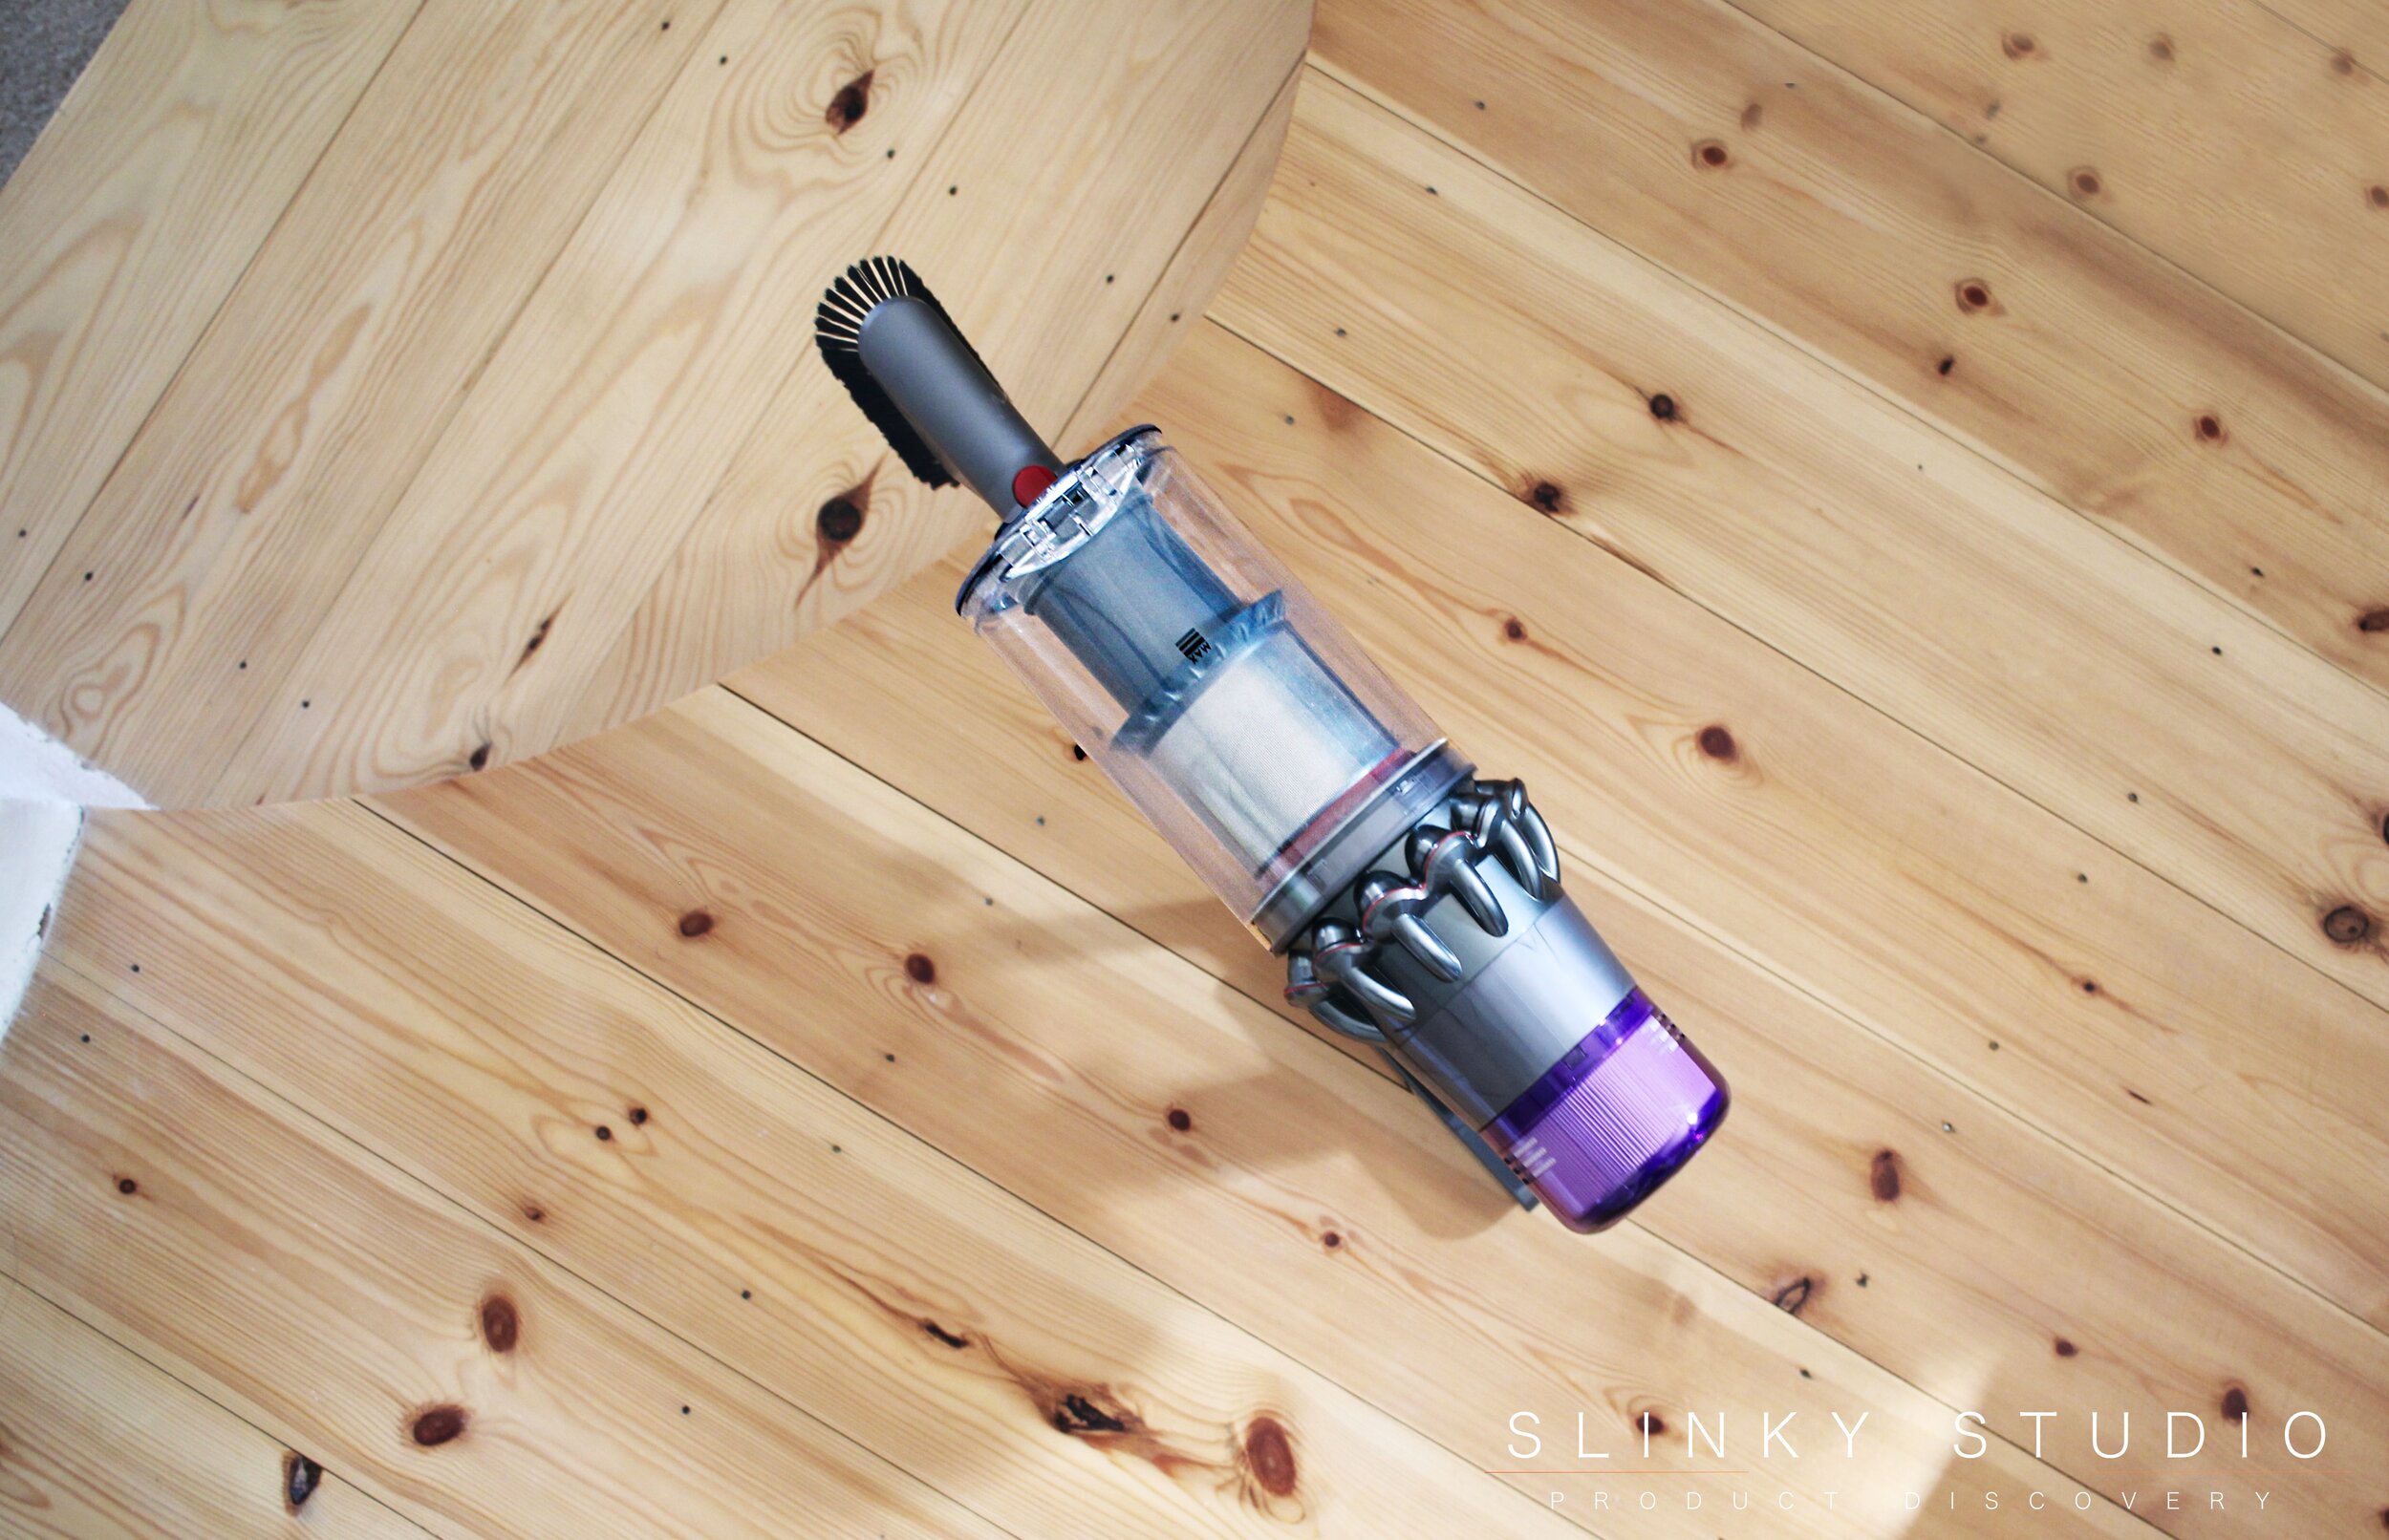 Dyson V11 Absolute Above View.jpg